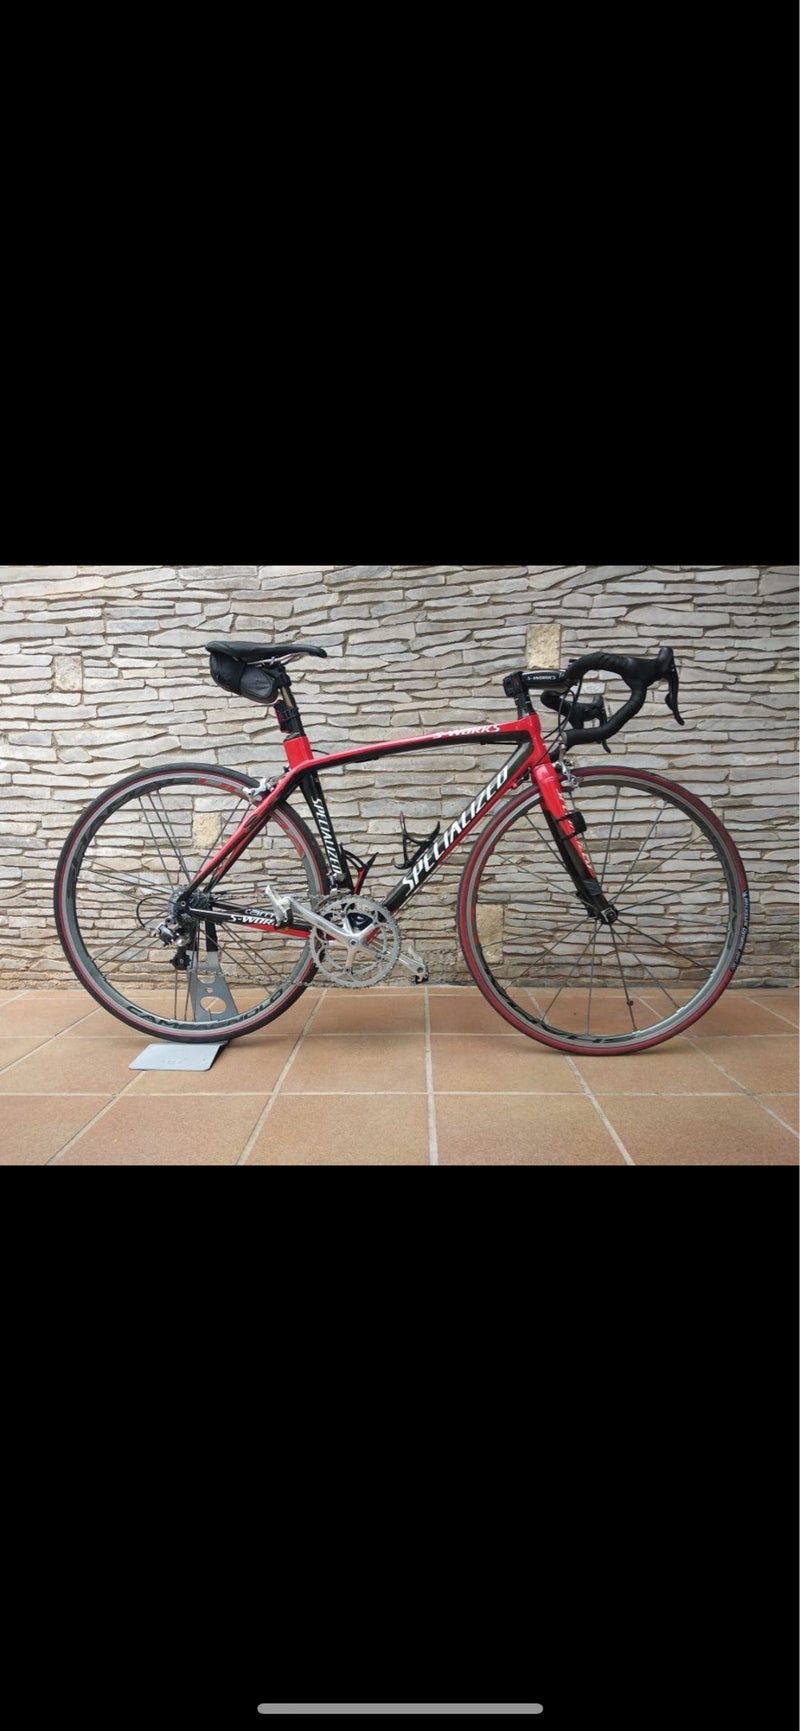 Specialized s-works talla 54 1,68-1,80cn  